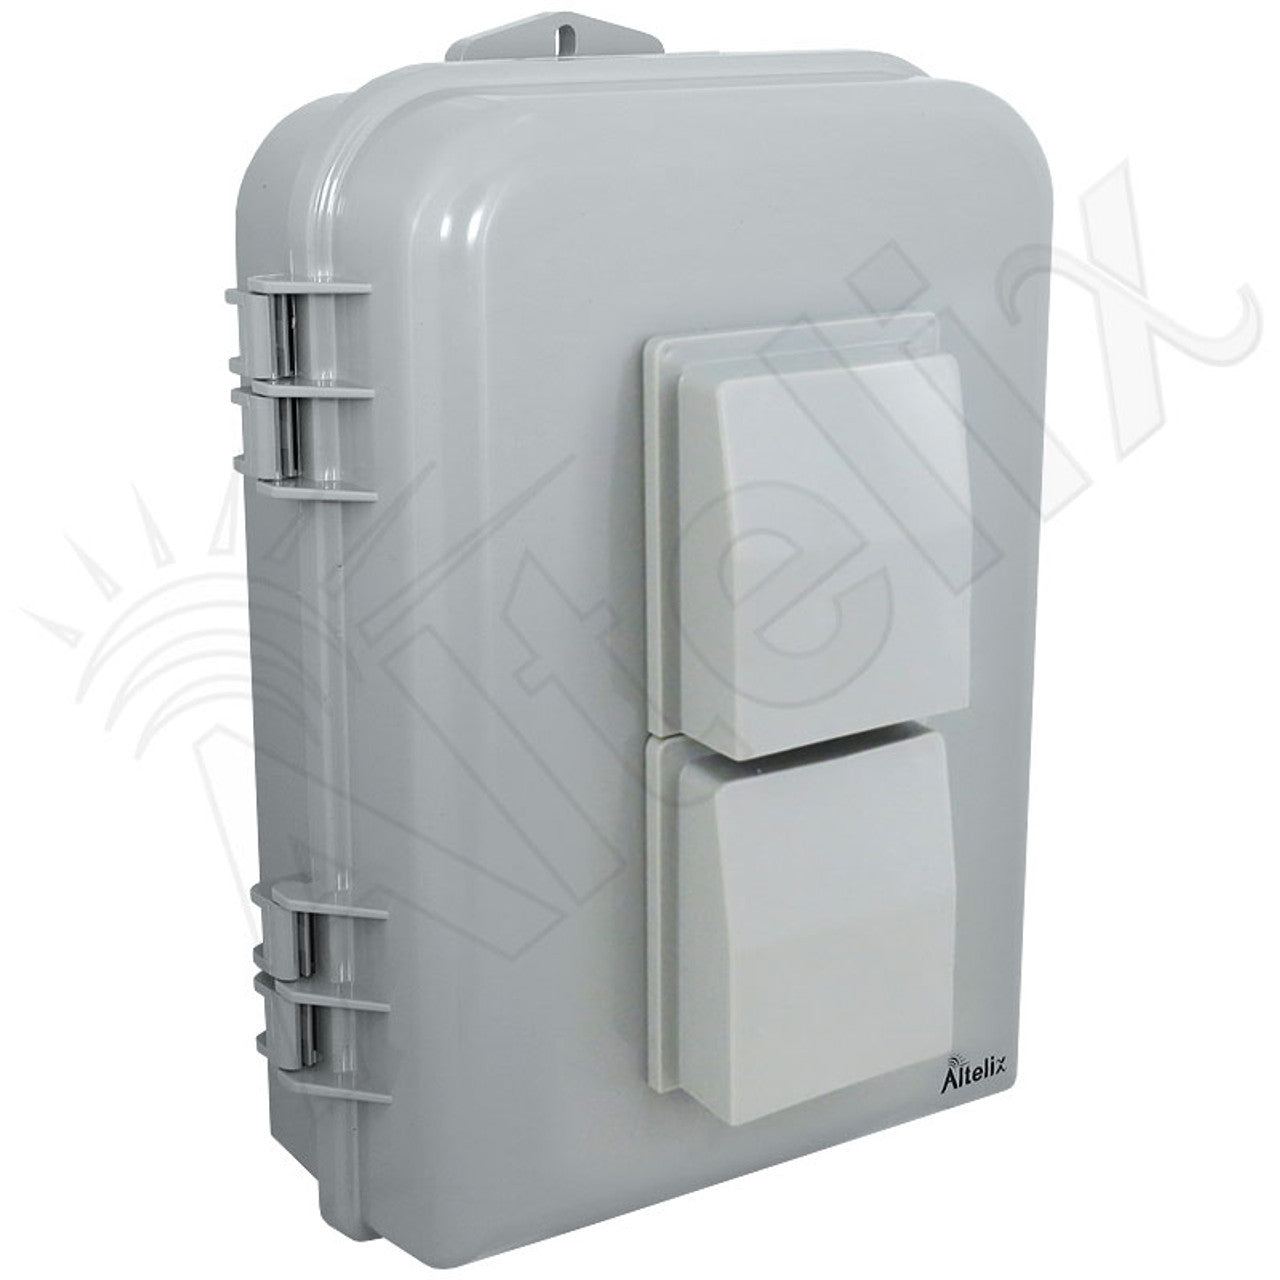 Buy gray Altelix 15x10x5 Polycarbonate + ABS Vented Weatherproof Enclosure with Aluminum Mounting Plate, 120 VAC Outlet &amp; Power Cord